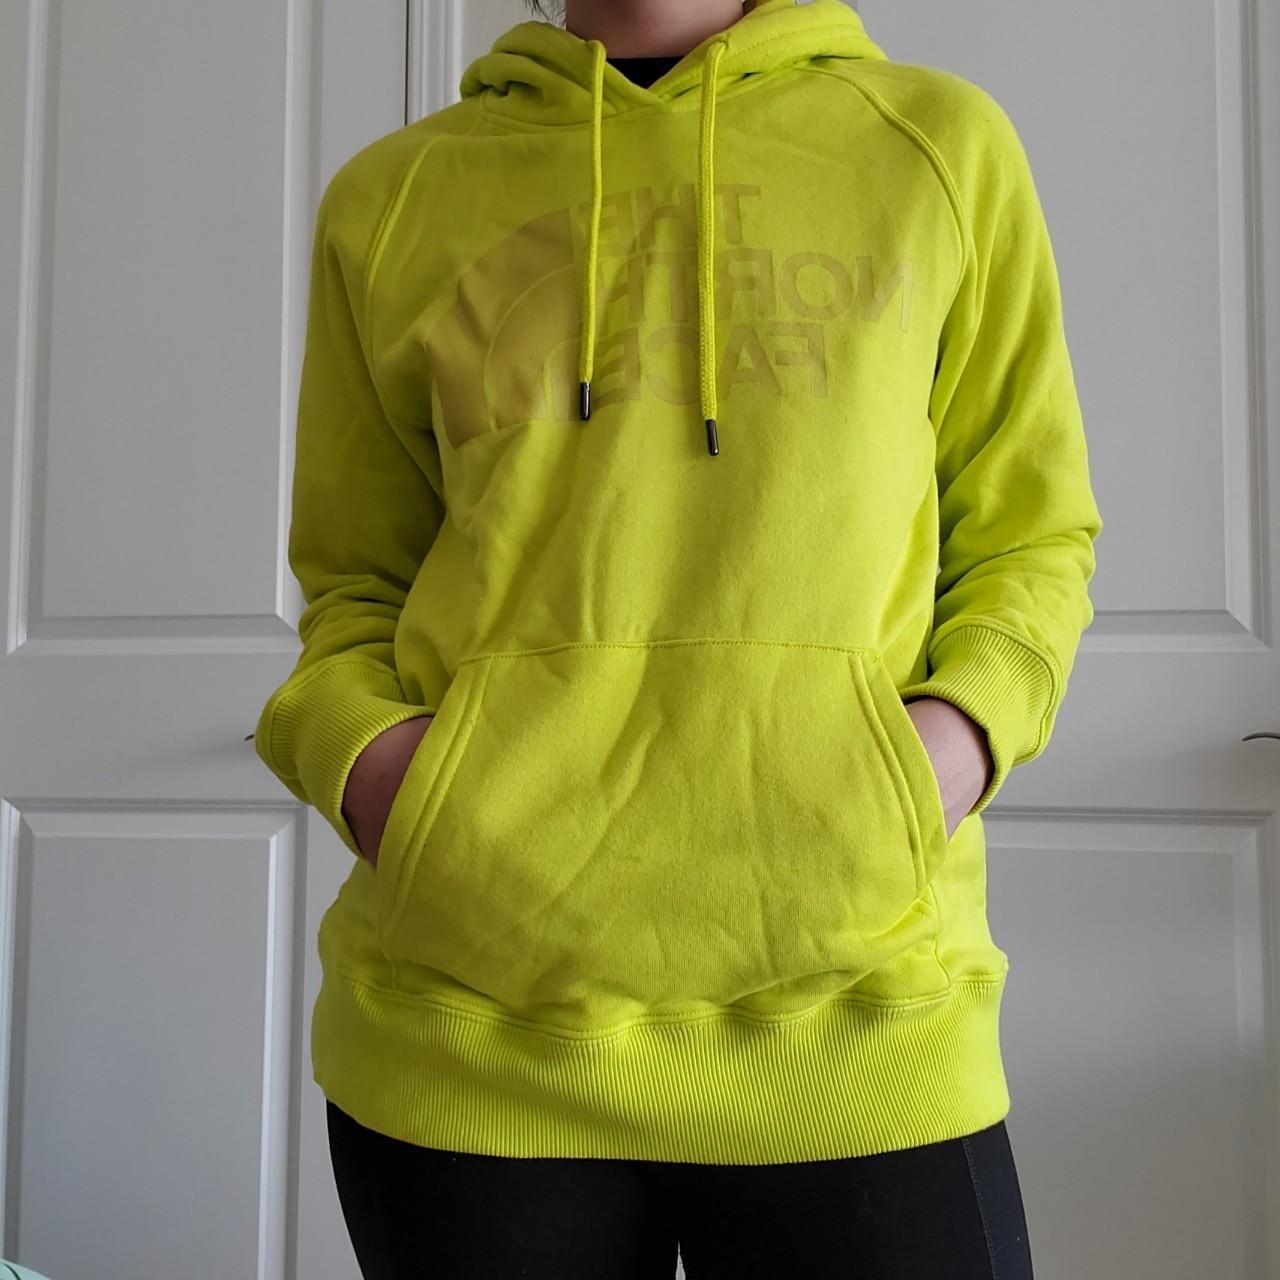 The North Face Women's Yellow and Green Hoodie (2)